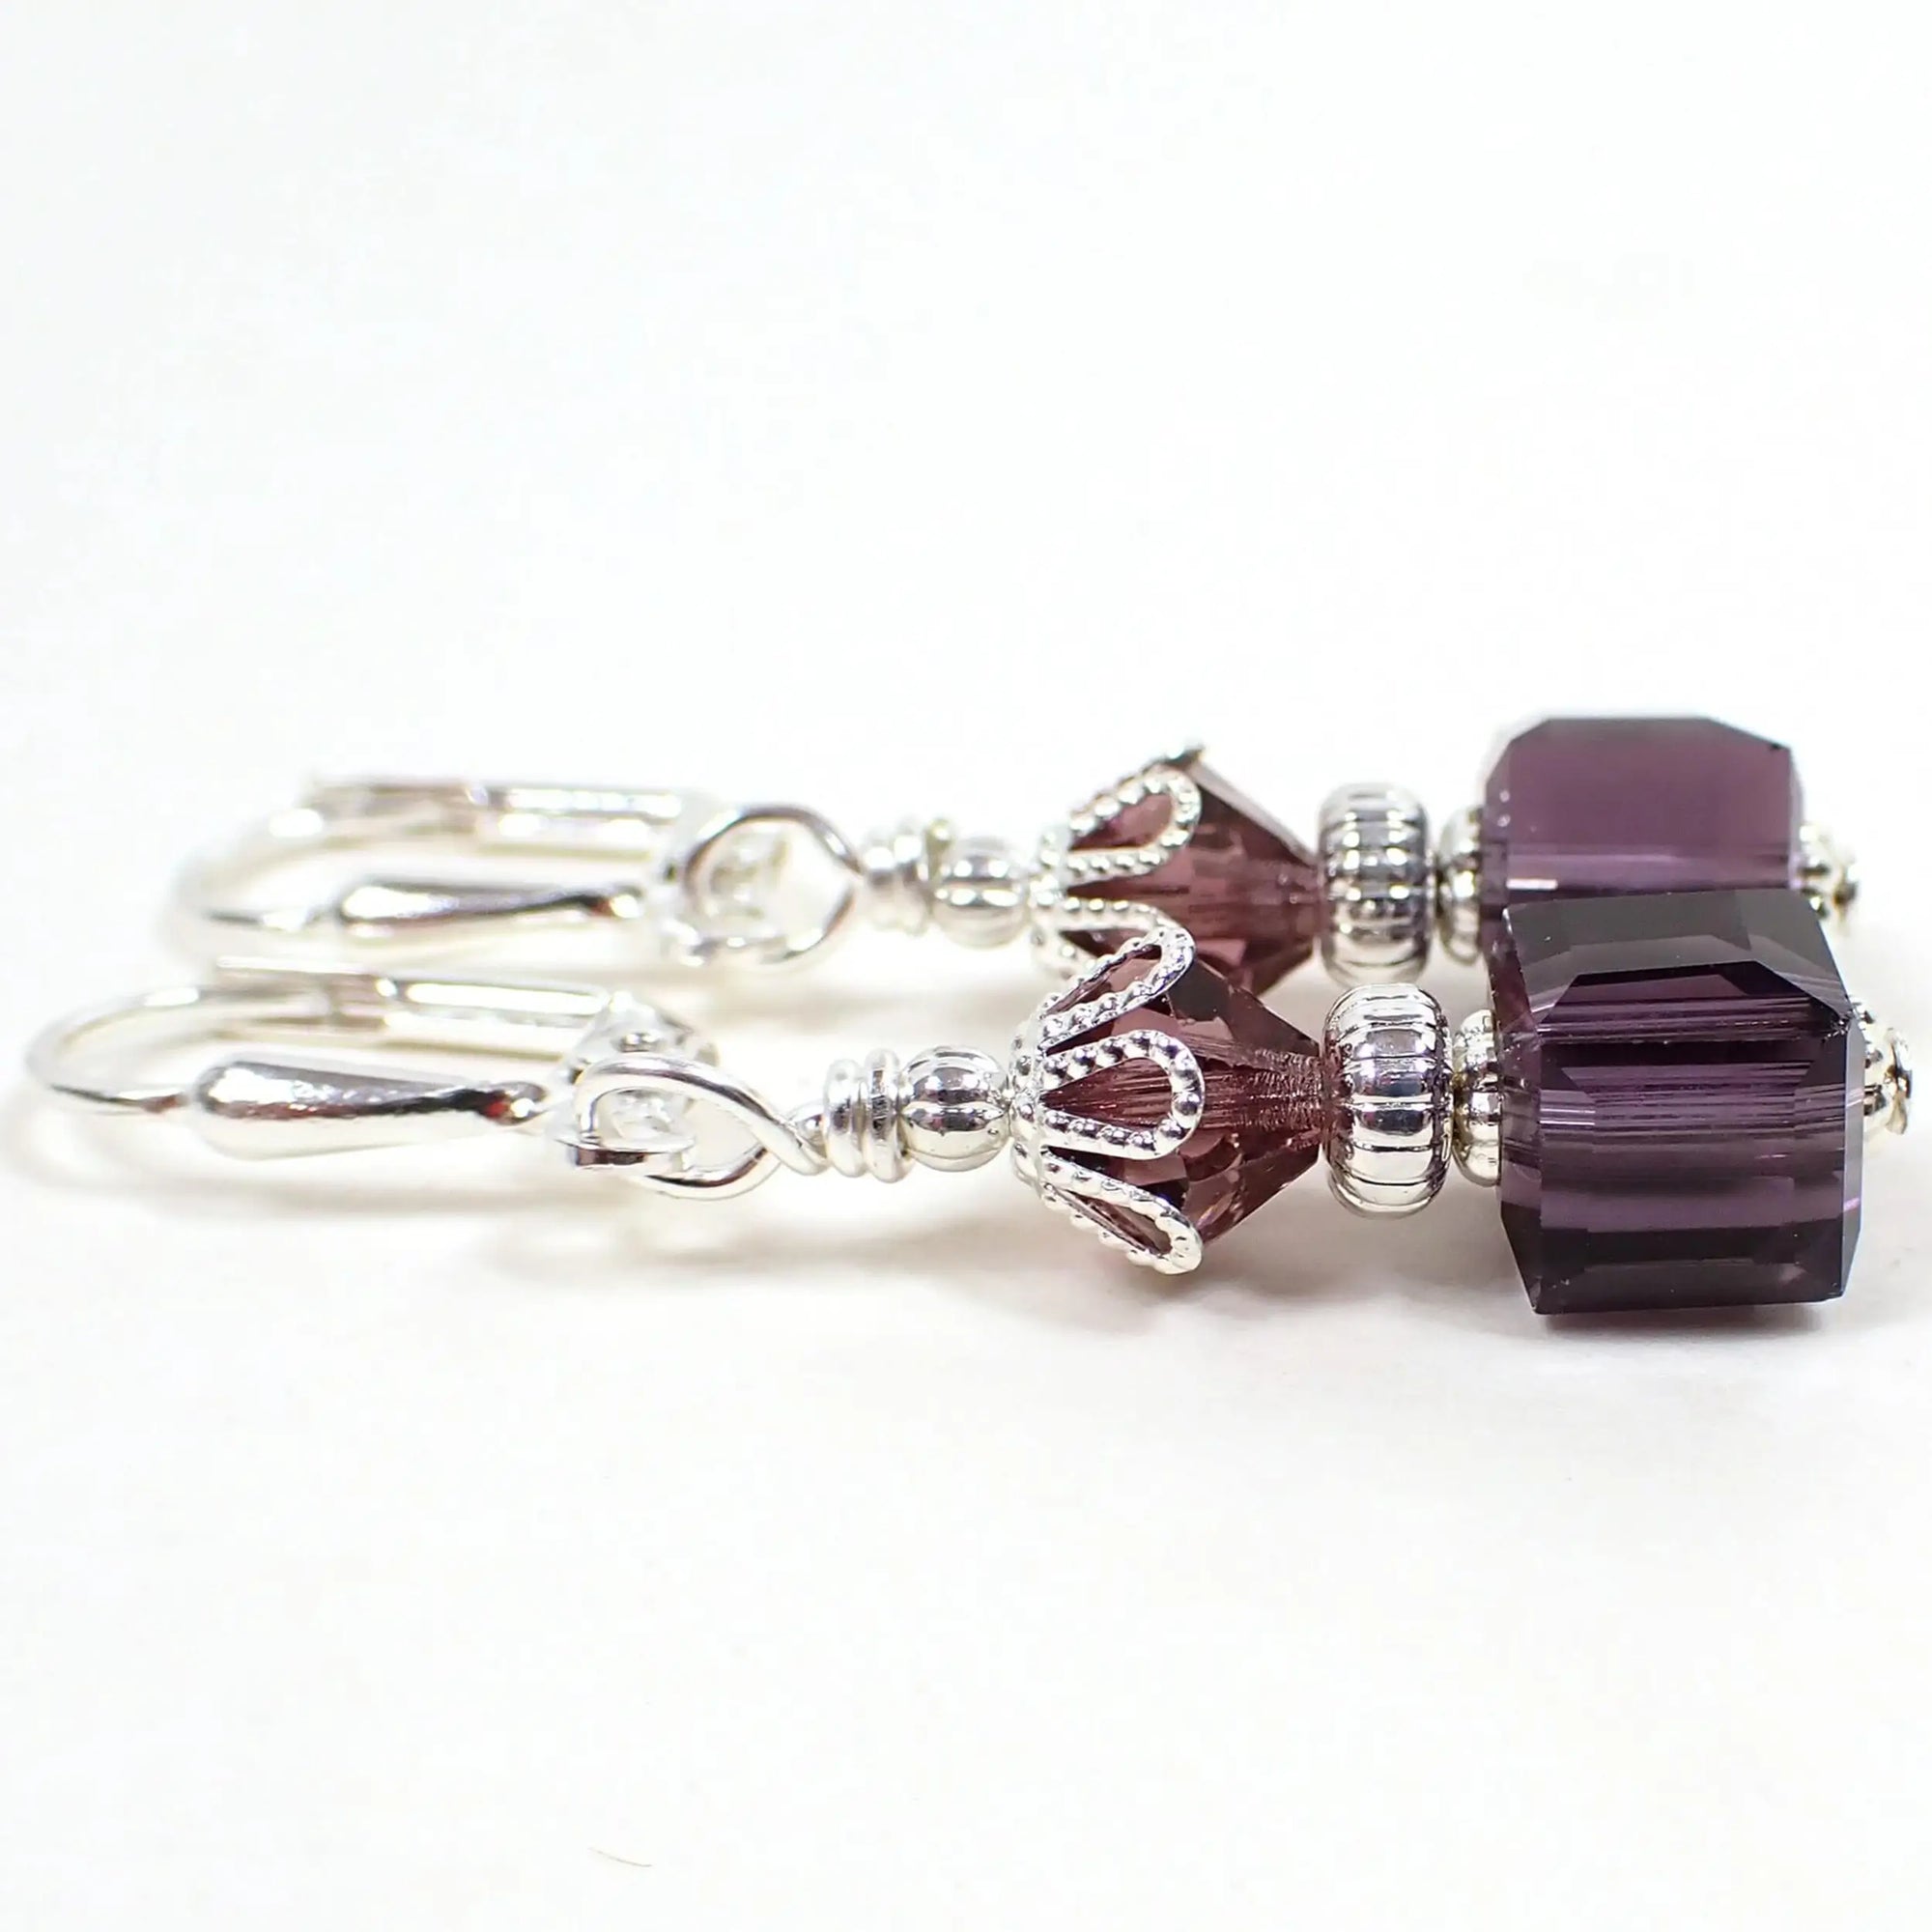 Side view of the handmade cube drop earrings. The metal is silver plated in color. There are faceted glass crystal bicone beads at the top and square cube beads at the bottom. The beads are dark purple in color.